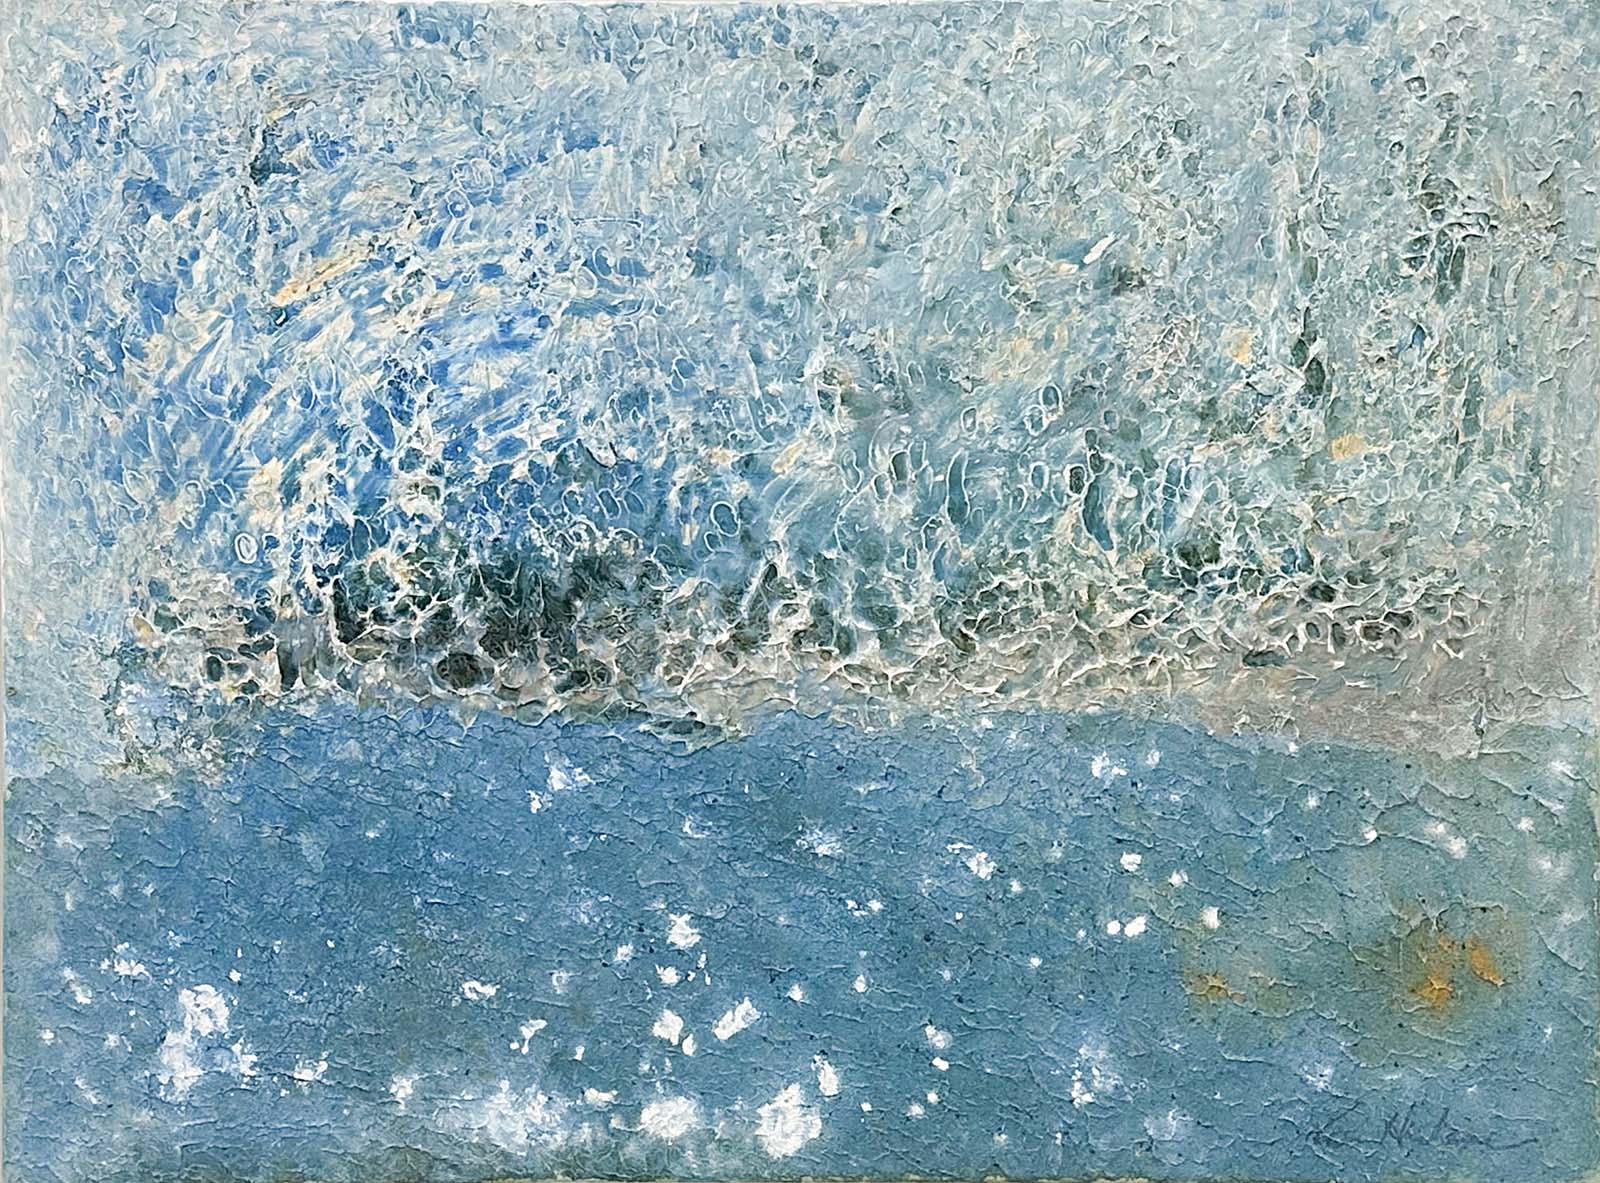 Abstract Painting. Title: Ice Bubbles, Original Acrylic 36x48 inches by Contemporary Canadian artist G Kim Hinkson.